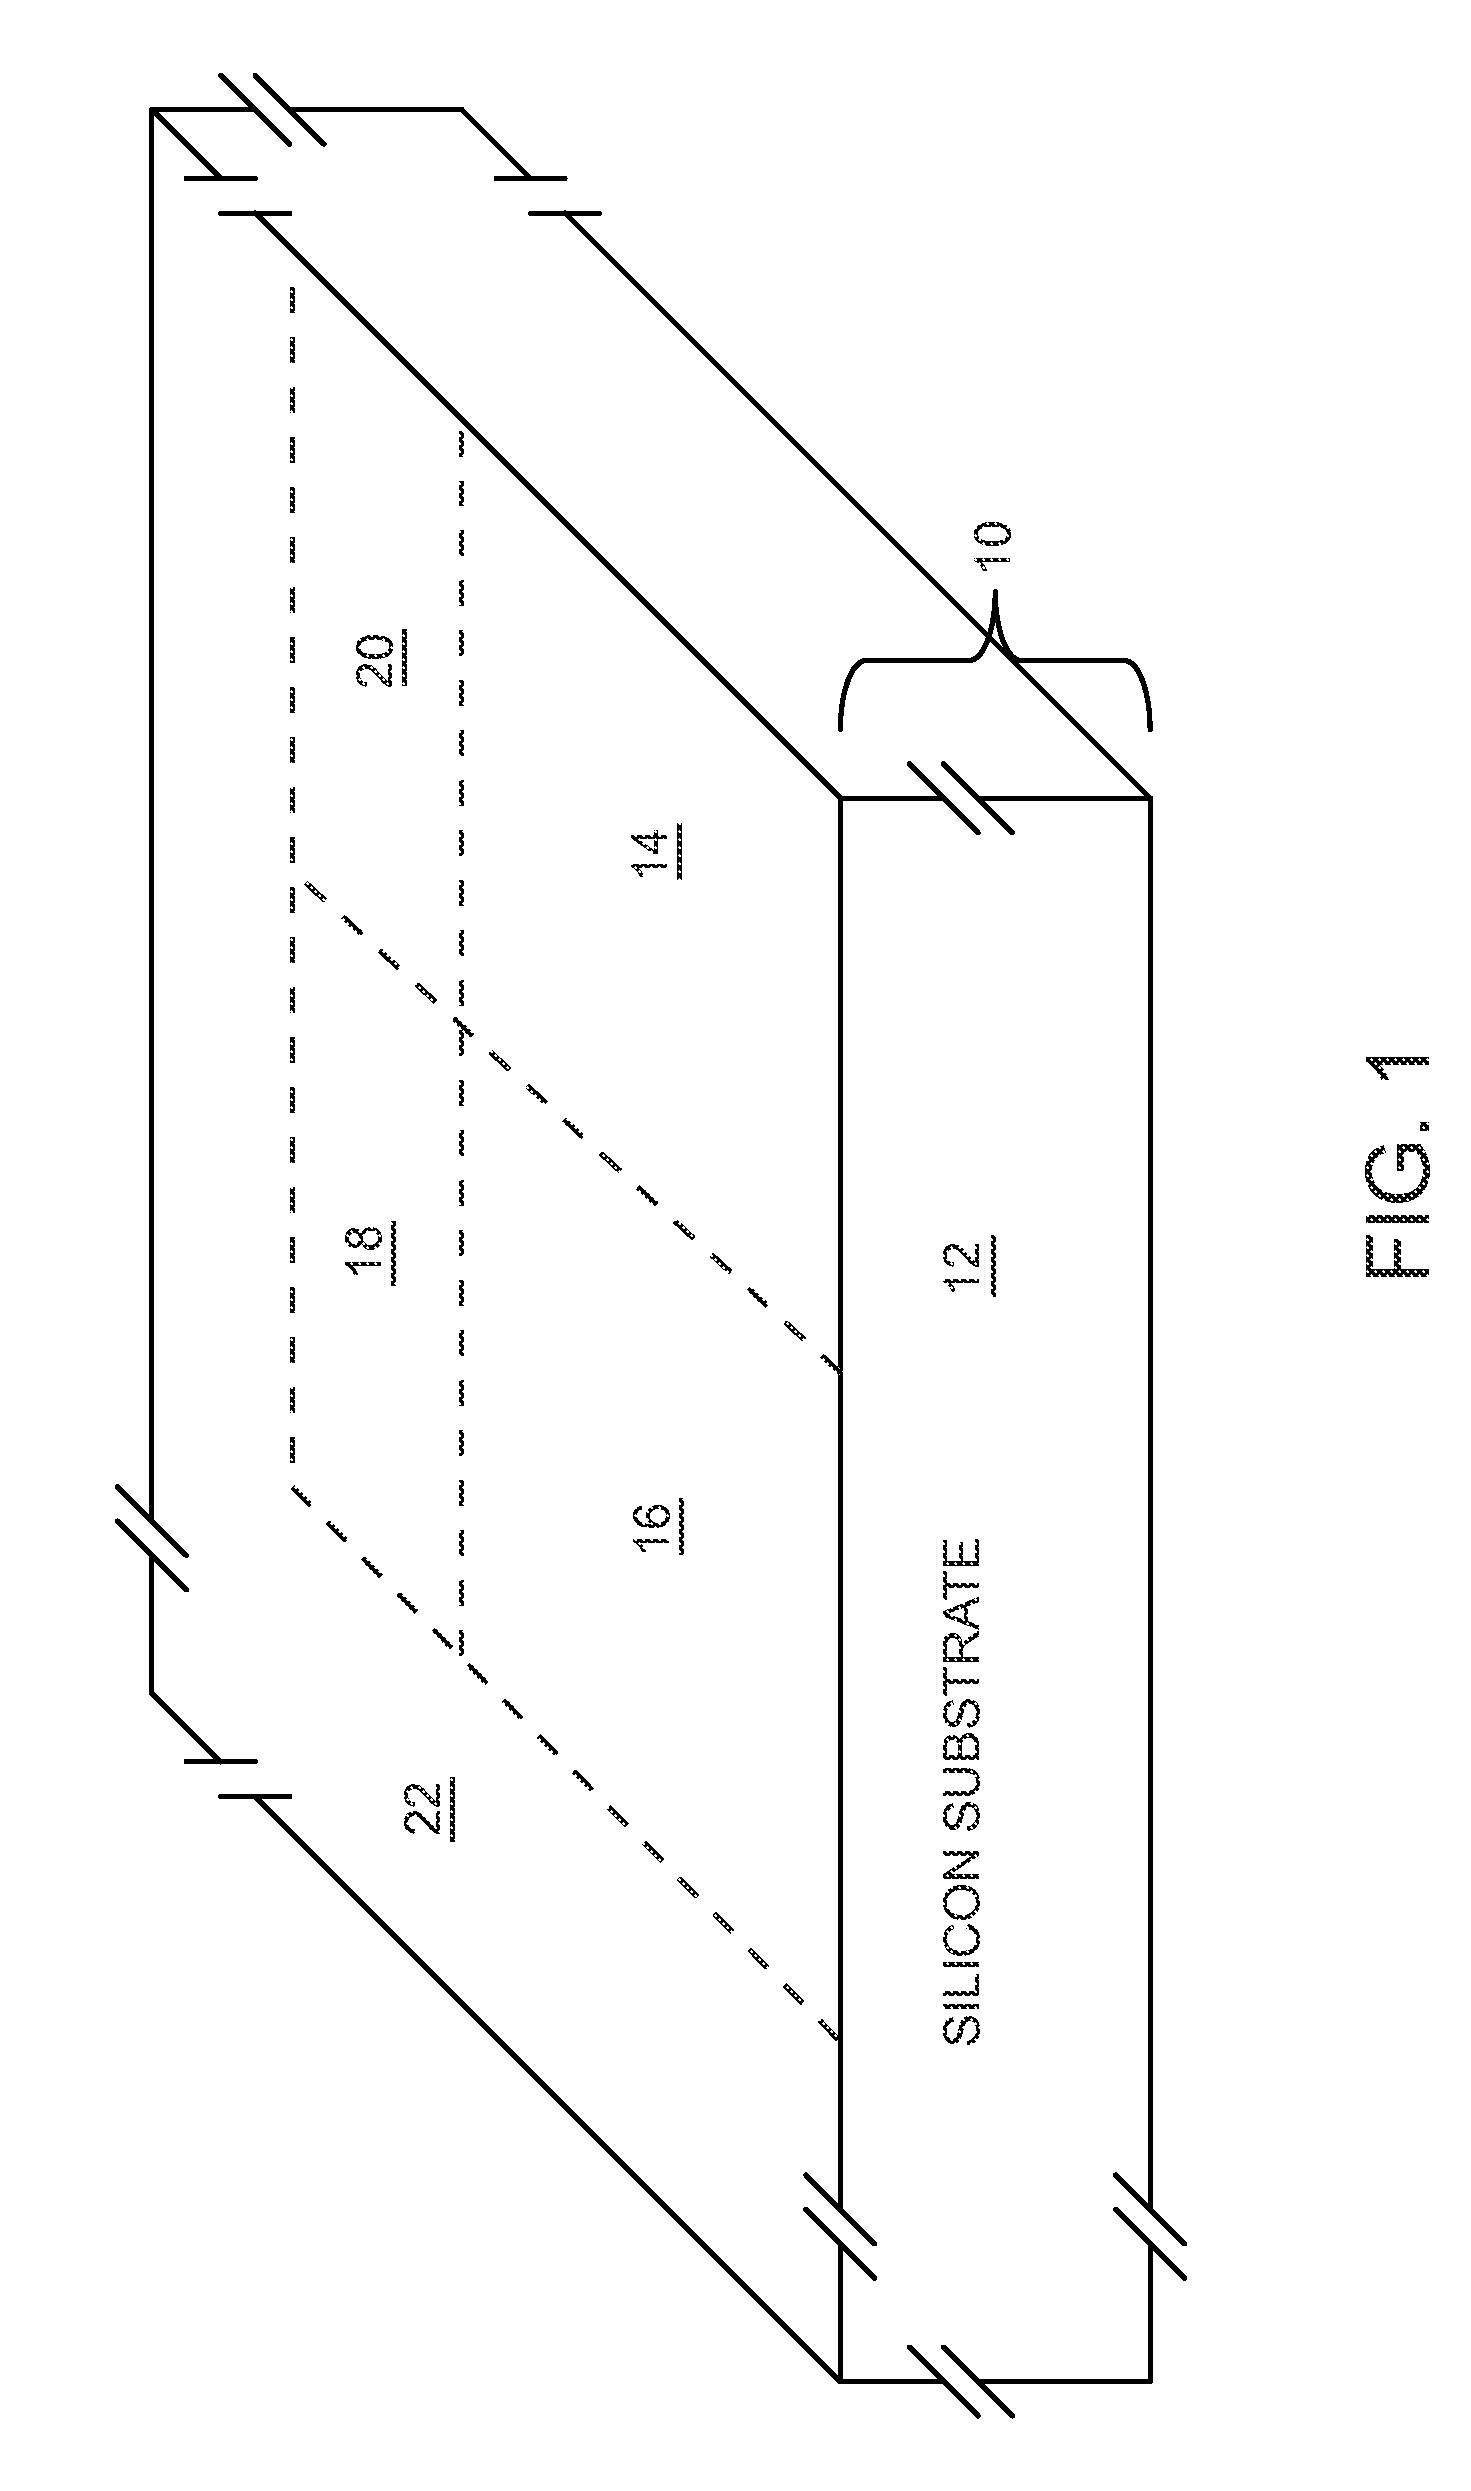 Linearity improvements of semiconductor substrate using passivation